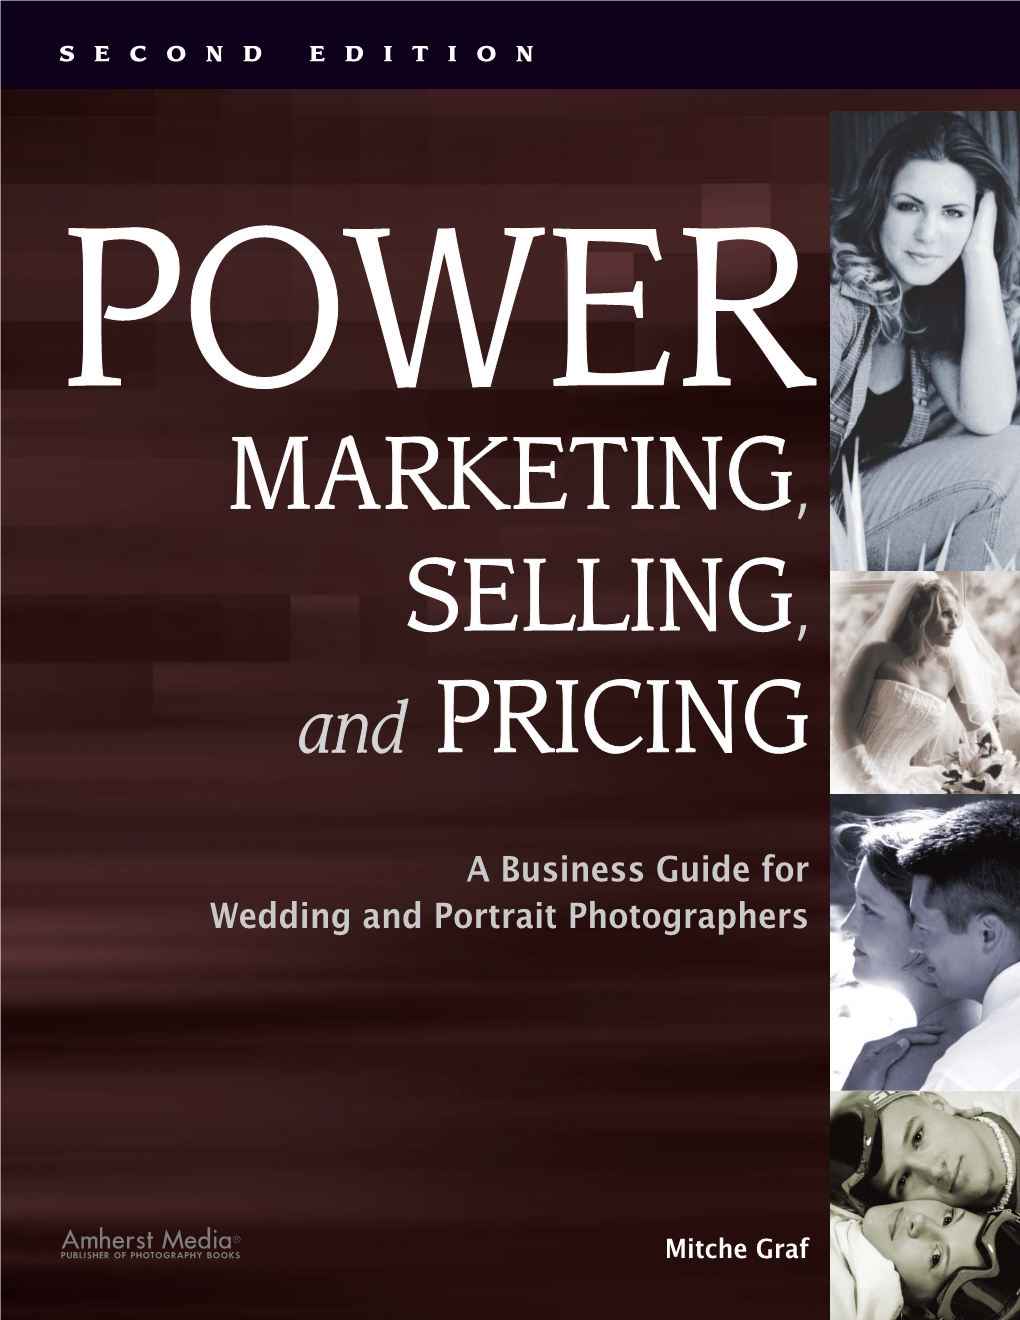 Power Marketing, Selling, and Pricing: a Business Guide For